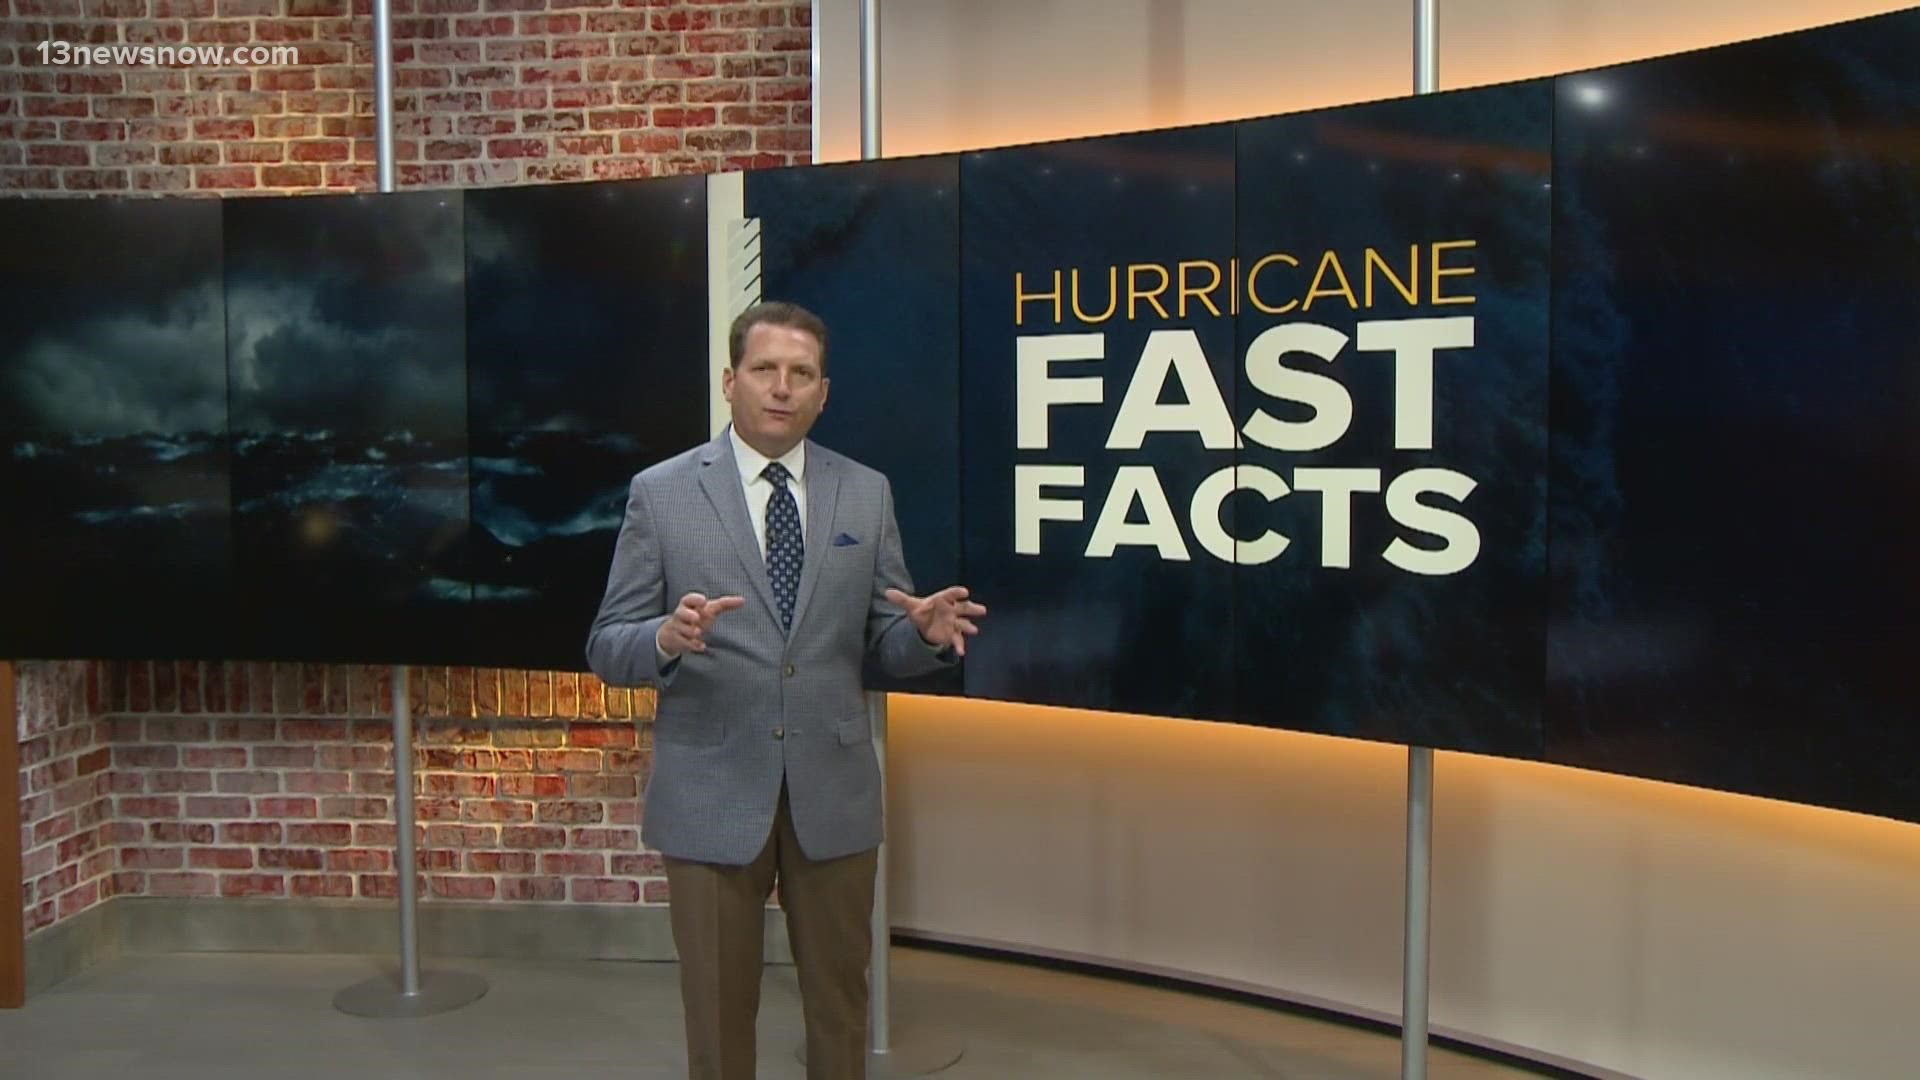 Most people are familiar with the calm center of a hurricane called the eye, but it's surrounded by a dangerous part, Craig Moeller explains.